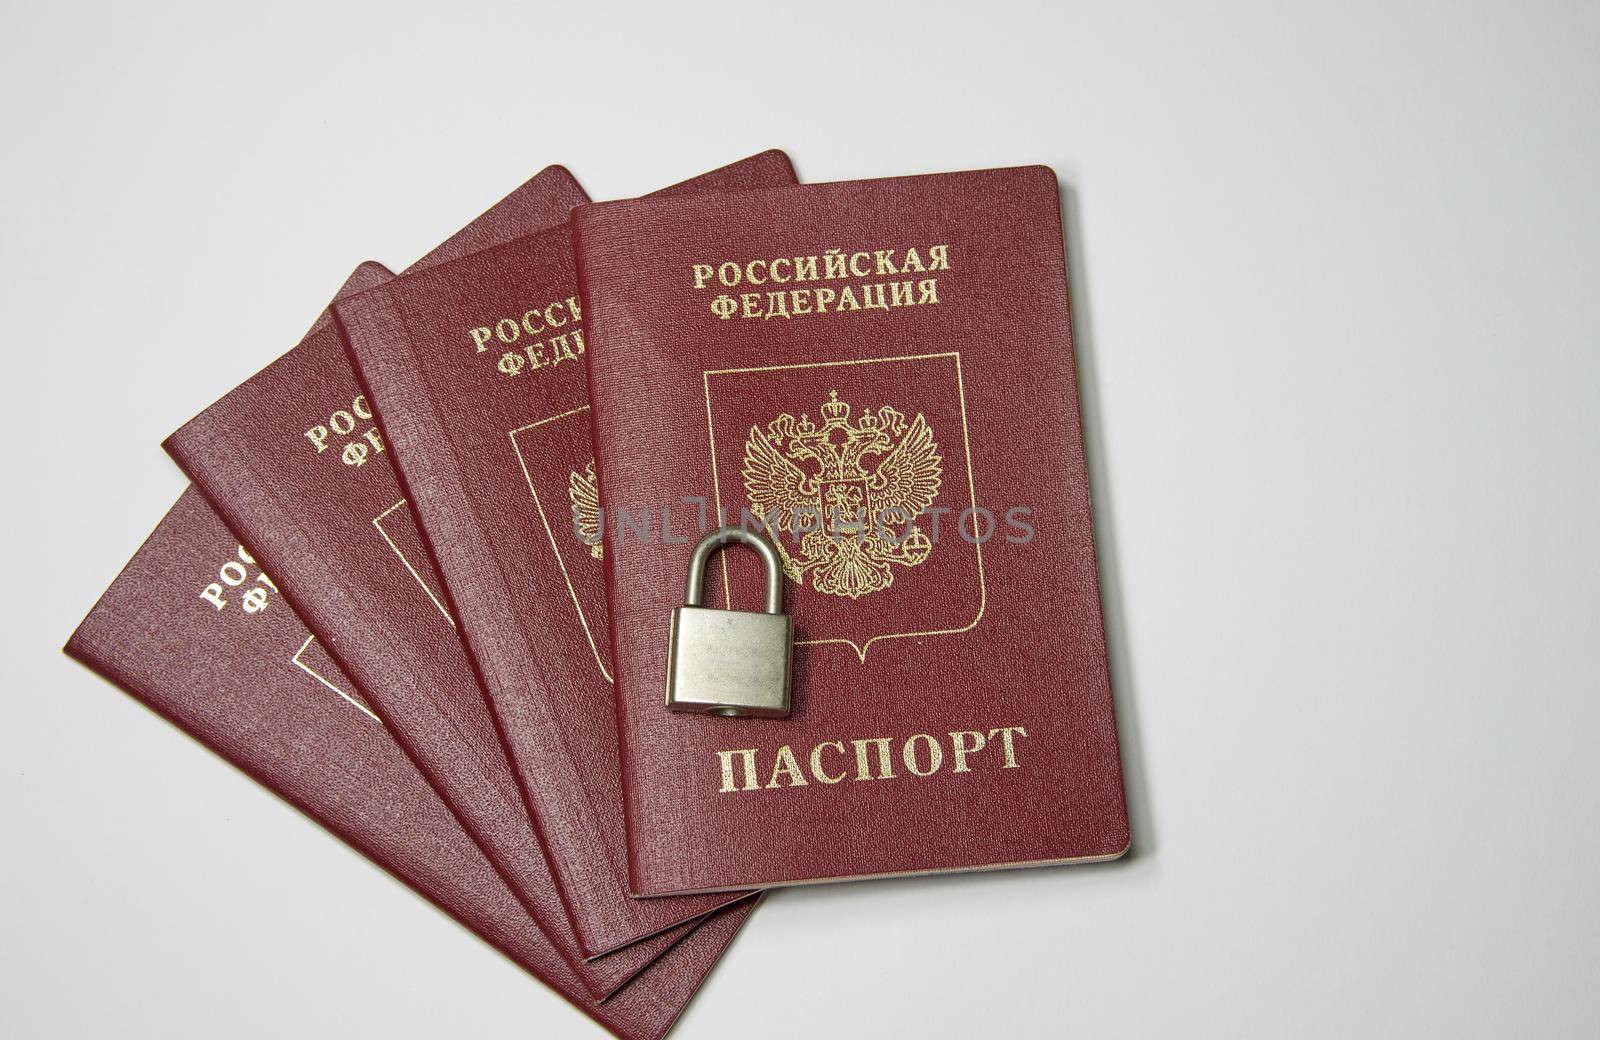 ban on leaving Russia, passports under lock and key by vadiar